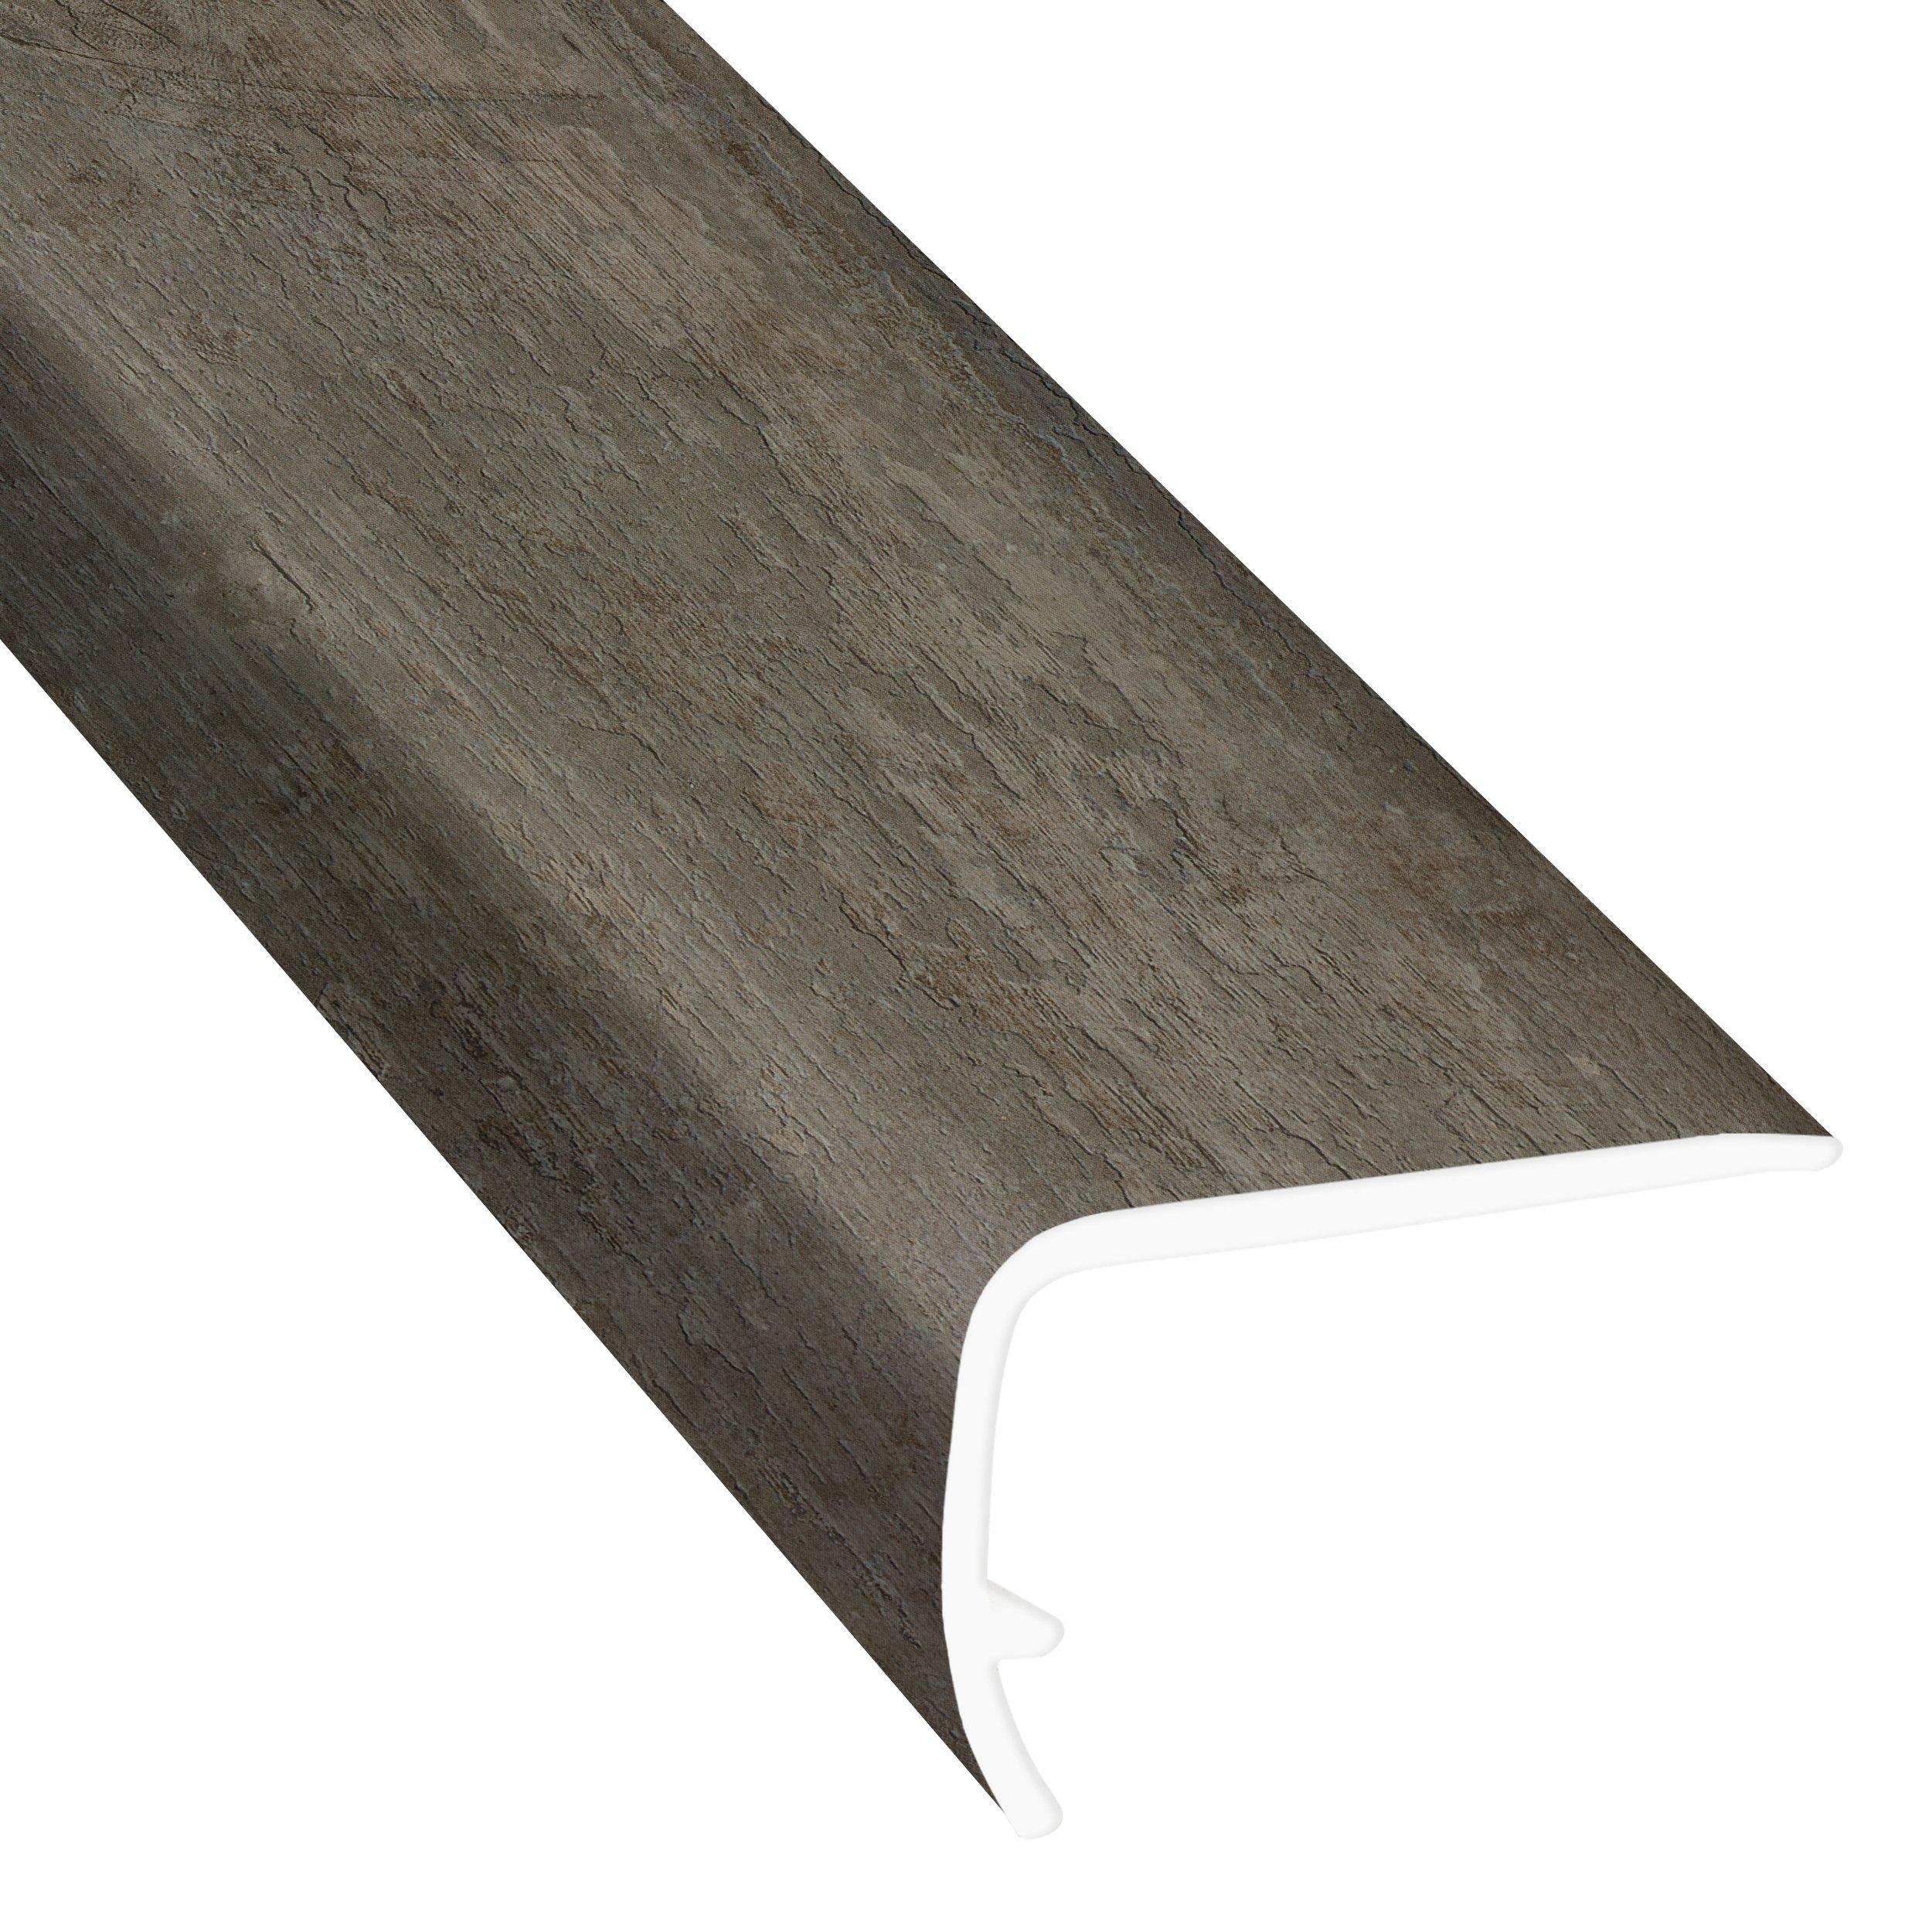 Monrovia Tile 94in. Vinyl Overlapping Stair Nose